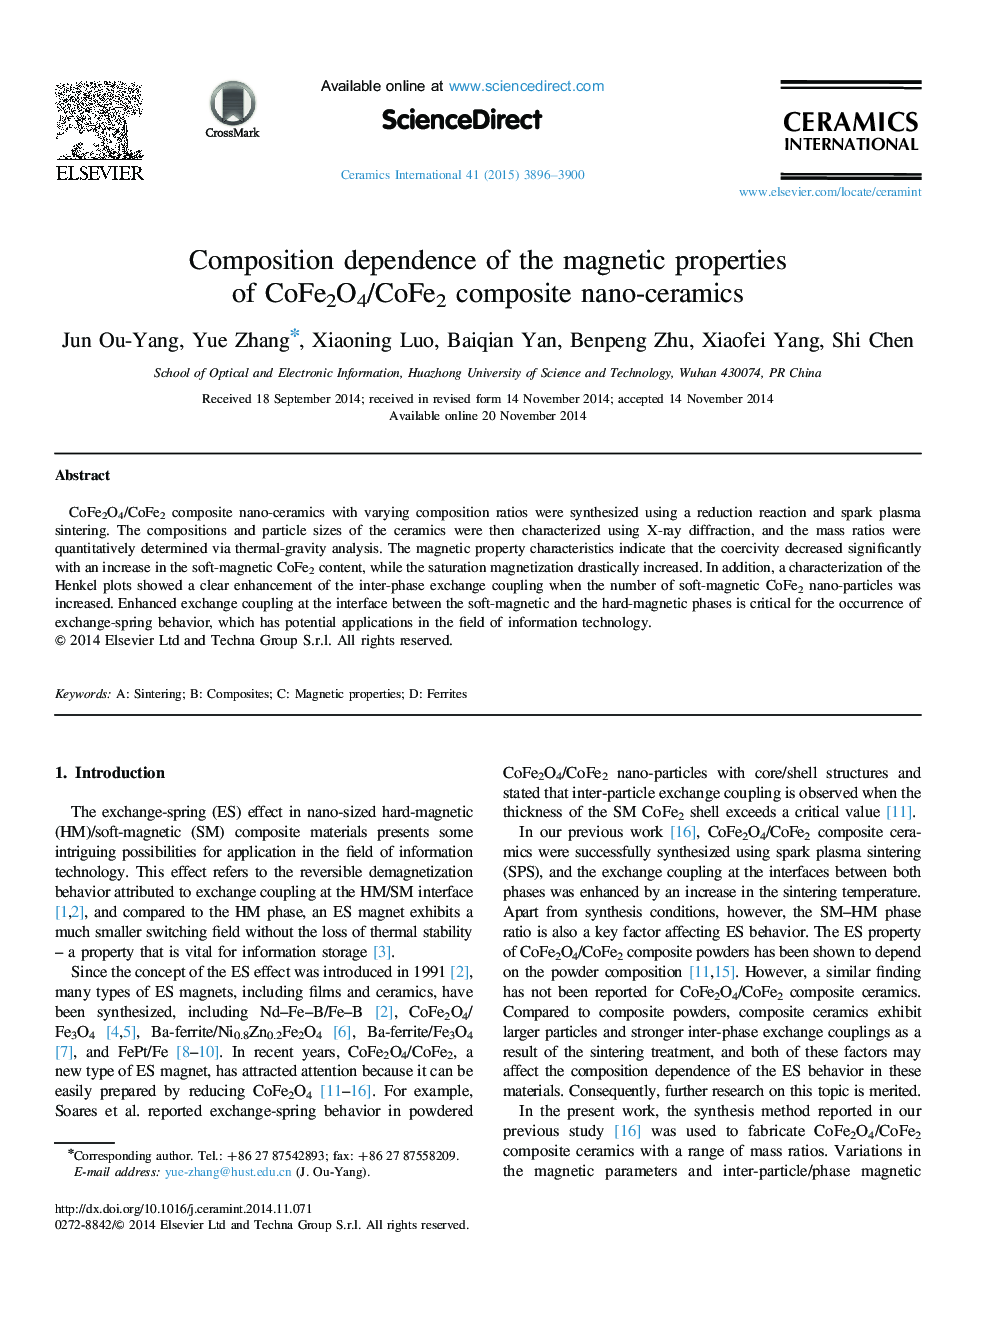 Composition dependence of the magnetic properties of CoFe2O4/CoFe2 composite nano-ceramics